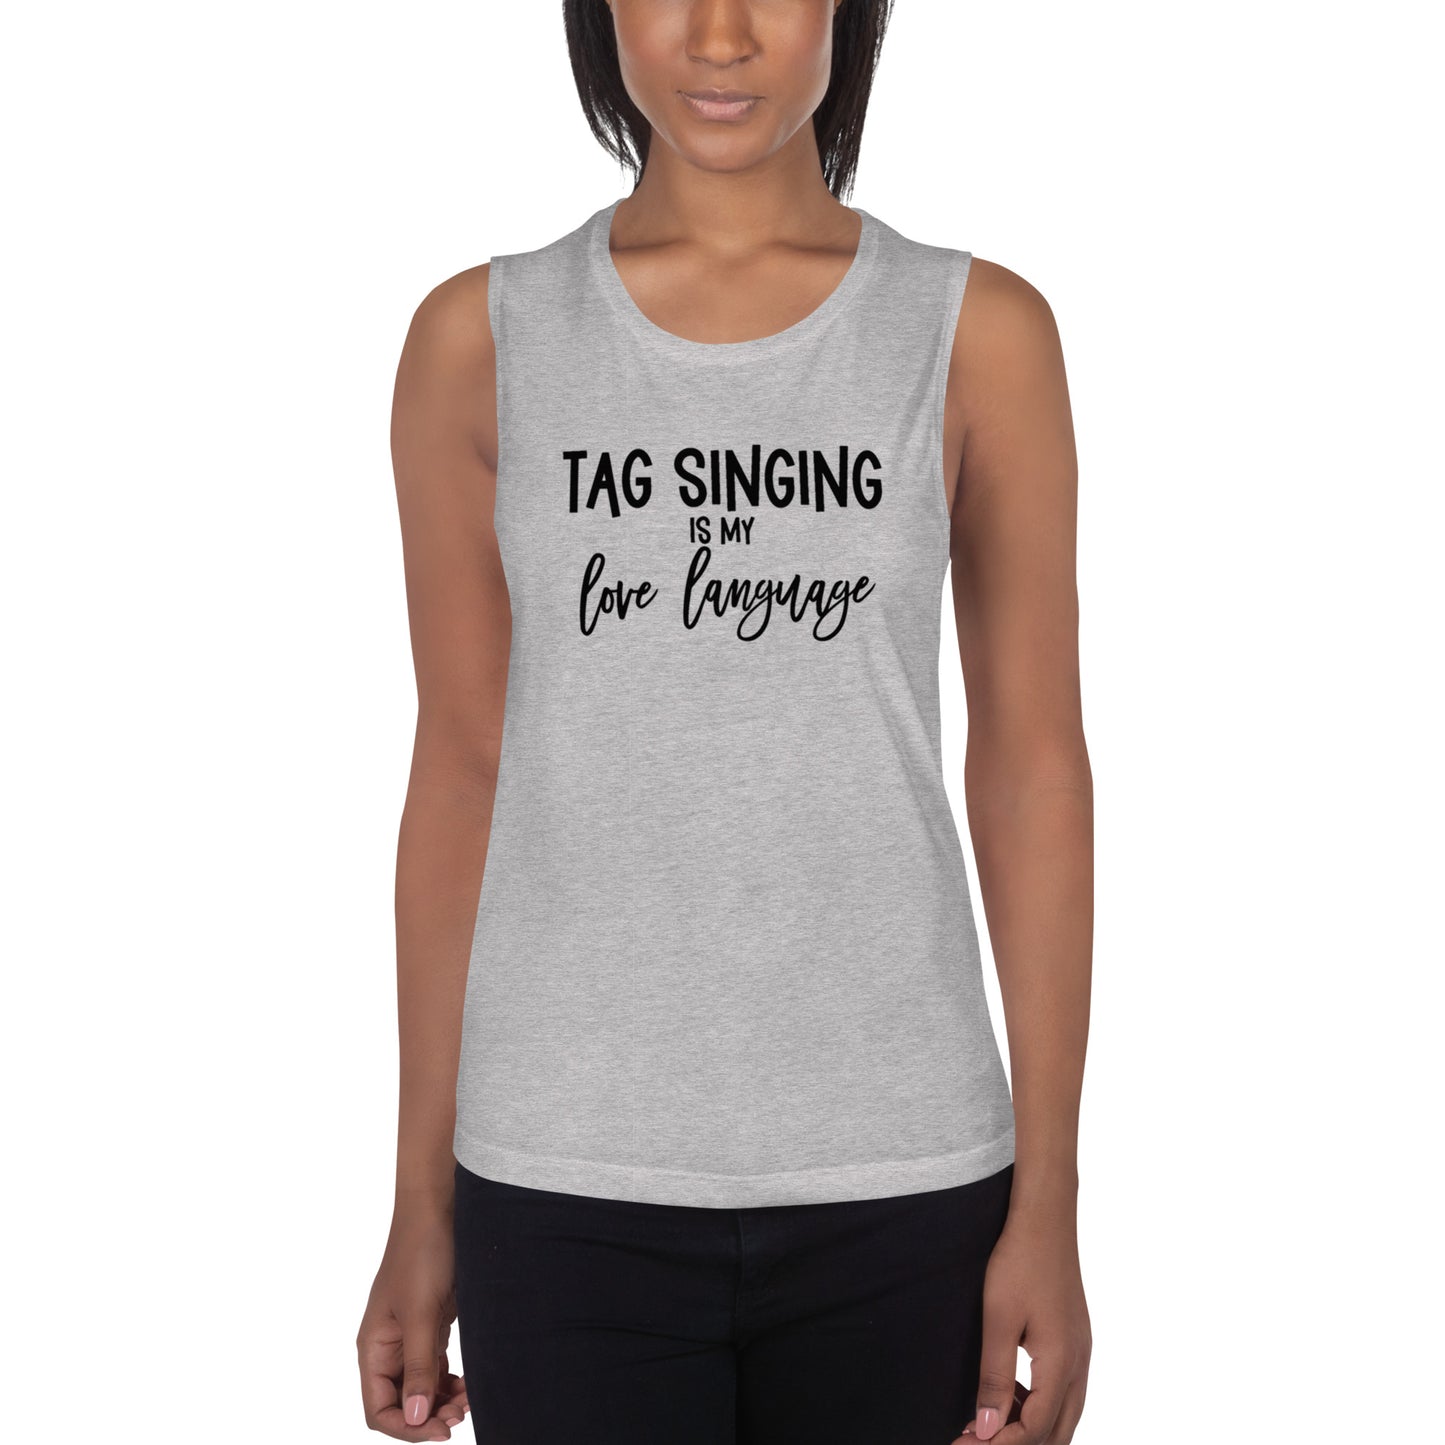 Tag singing is my love language -  Muscle Tank